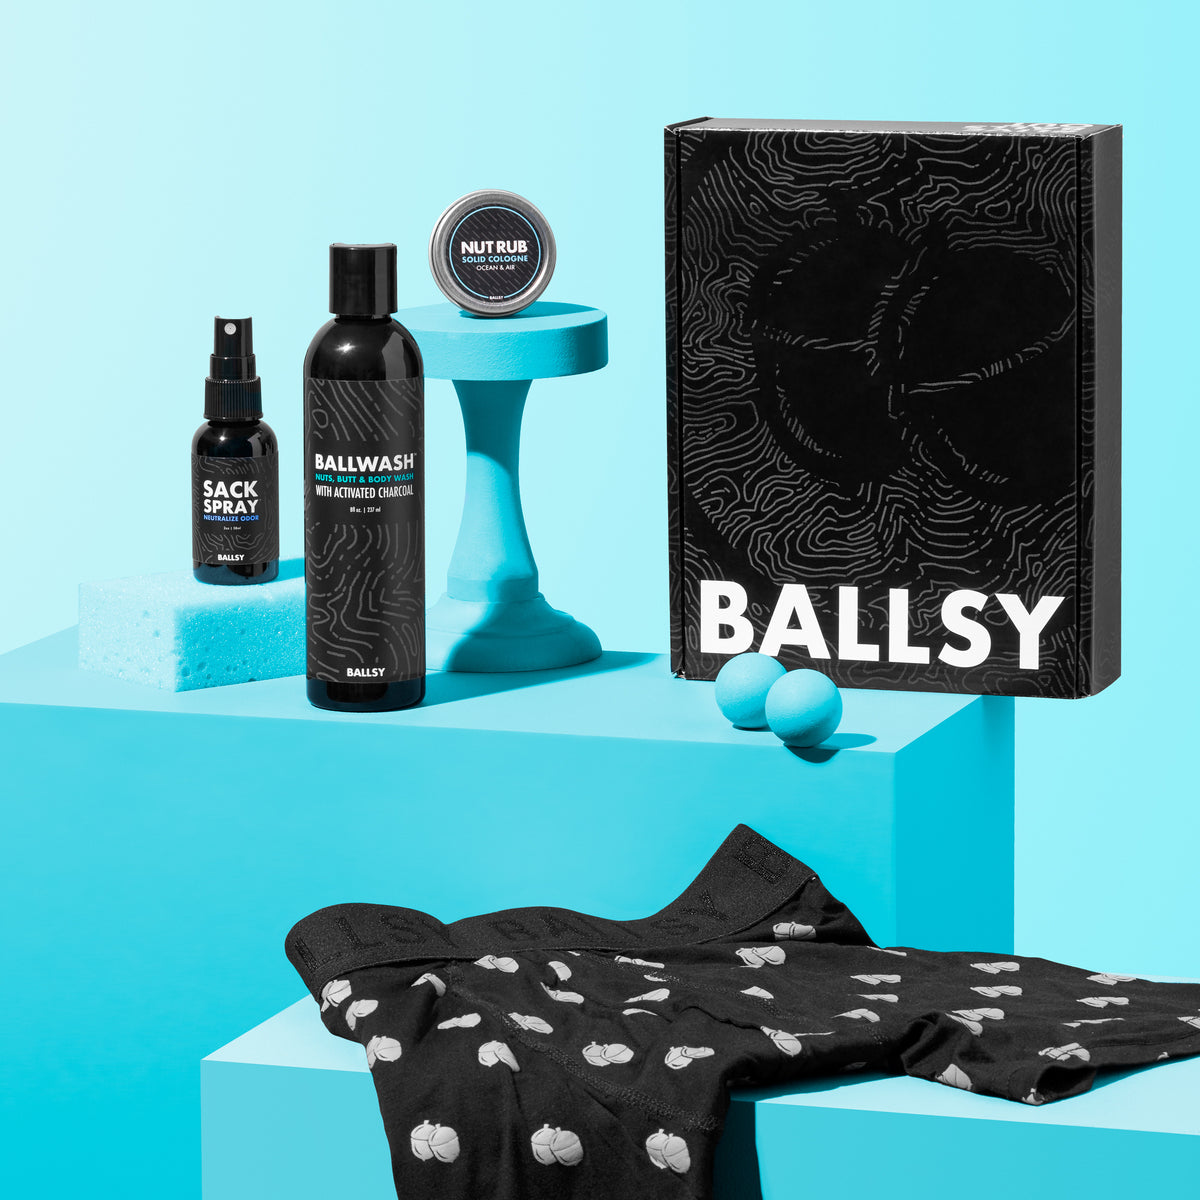 A set of personal care items from Ballsy along with a pair of underwear.